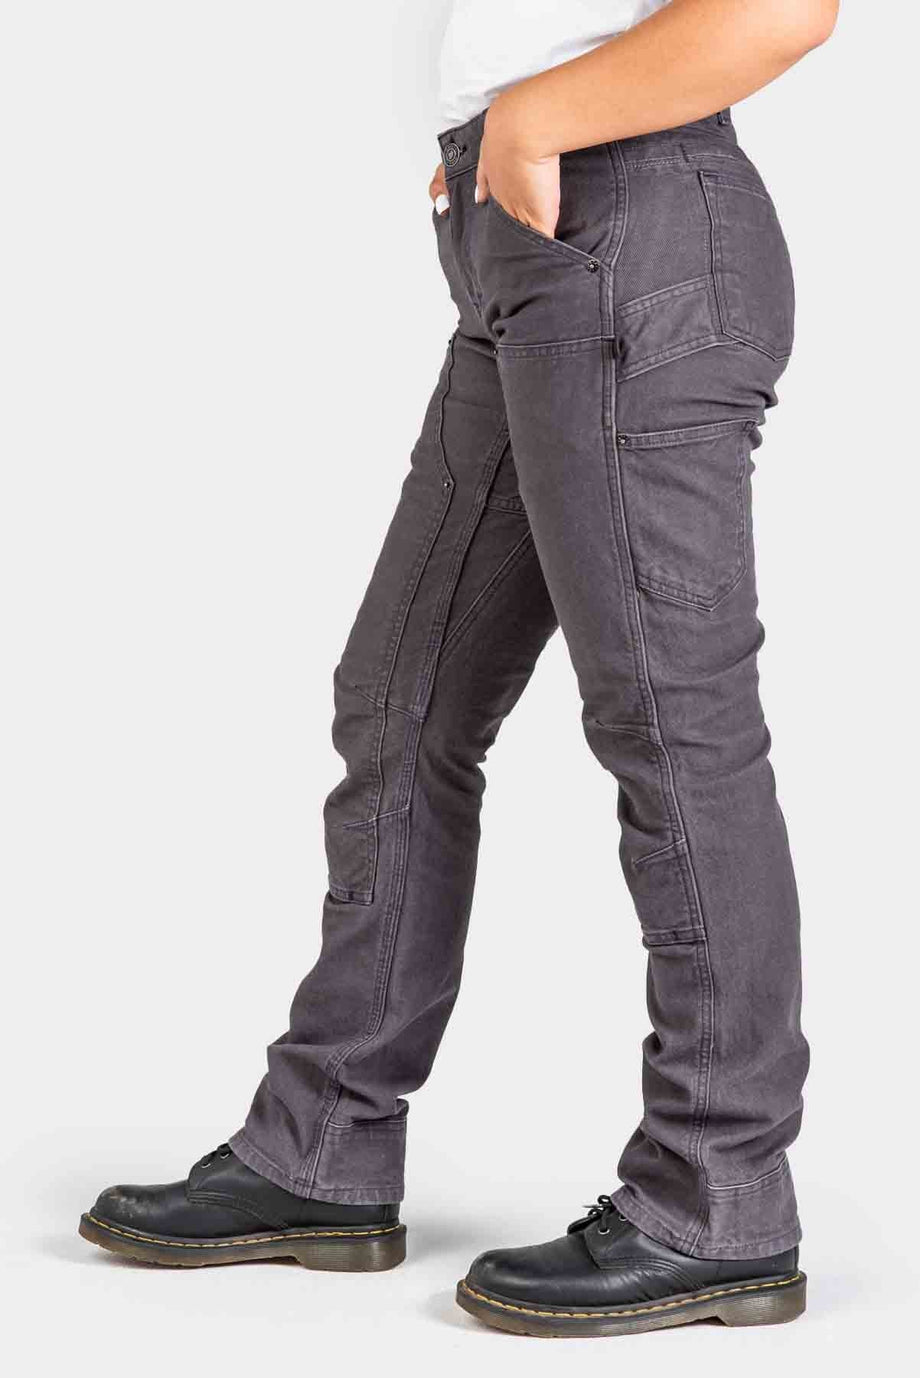 Dovetail Workwear Women's Grey Canvas Work Pants (12 X 32) in the